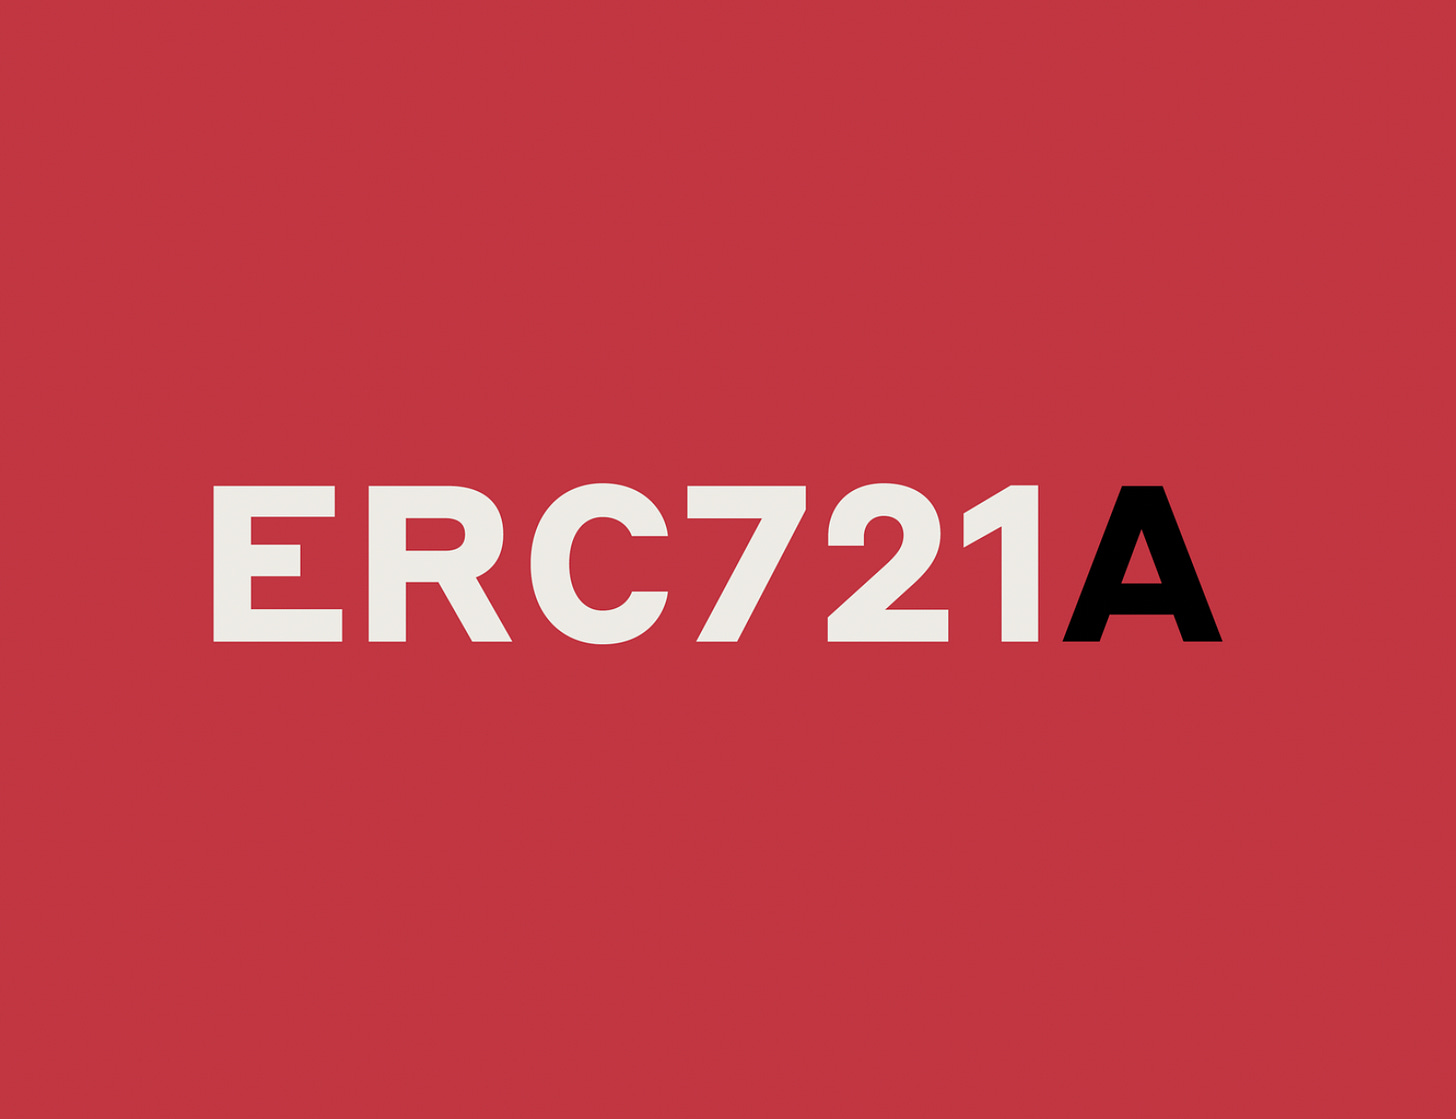 Text reading "ERC721A" on a red background.